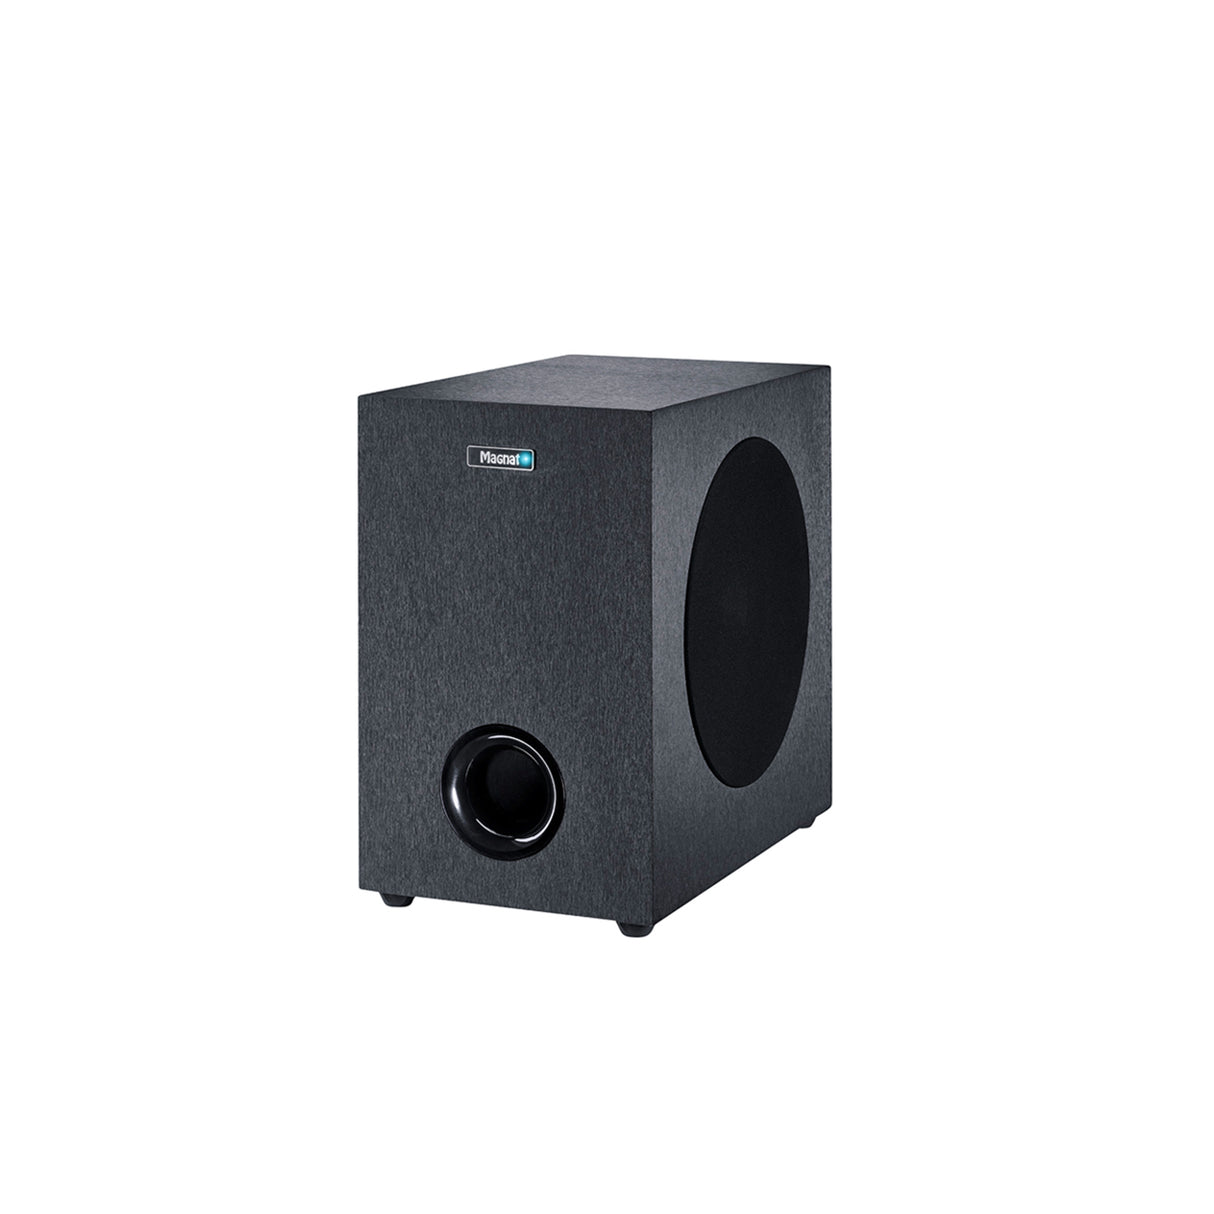 Magnat SBW 280 - 2.1 Channel Home Cinema Soundar with Wireless Subwoofer